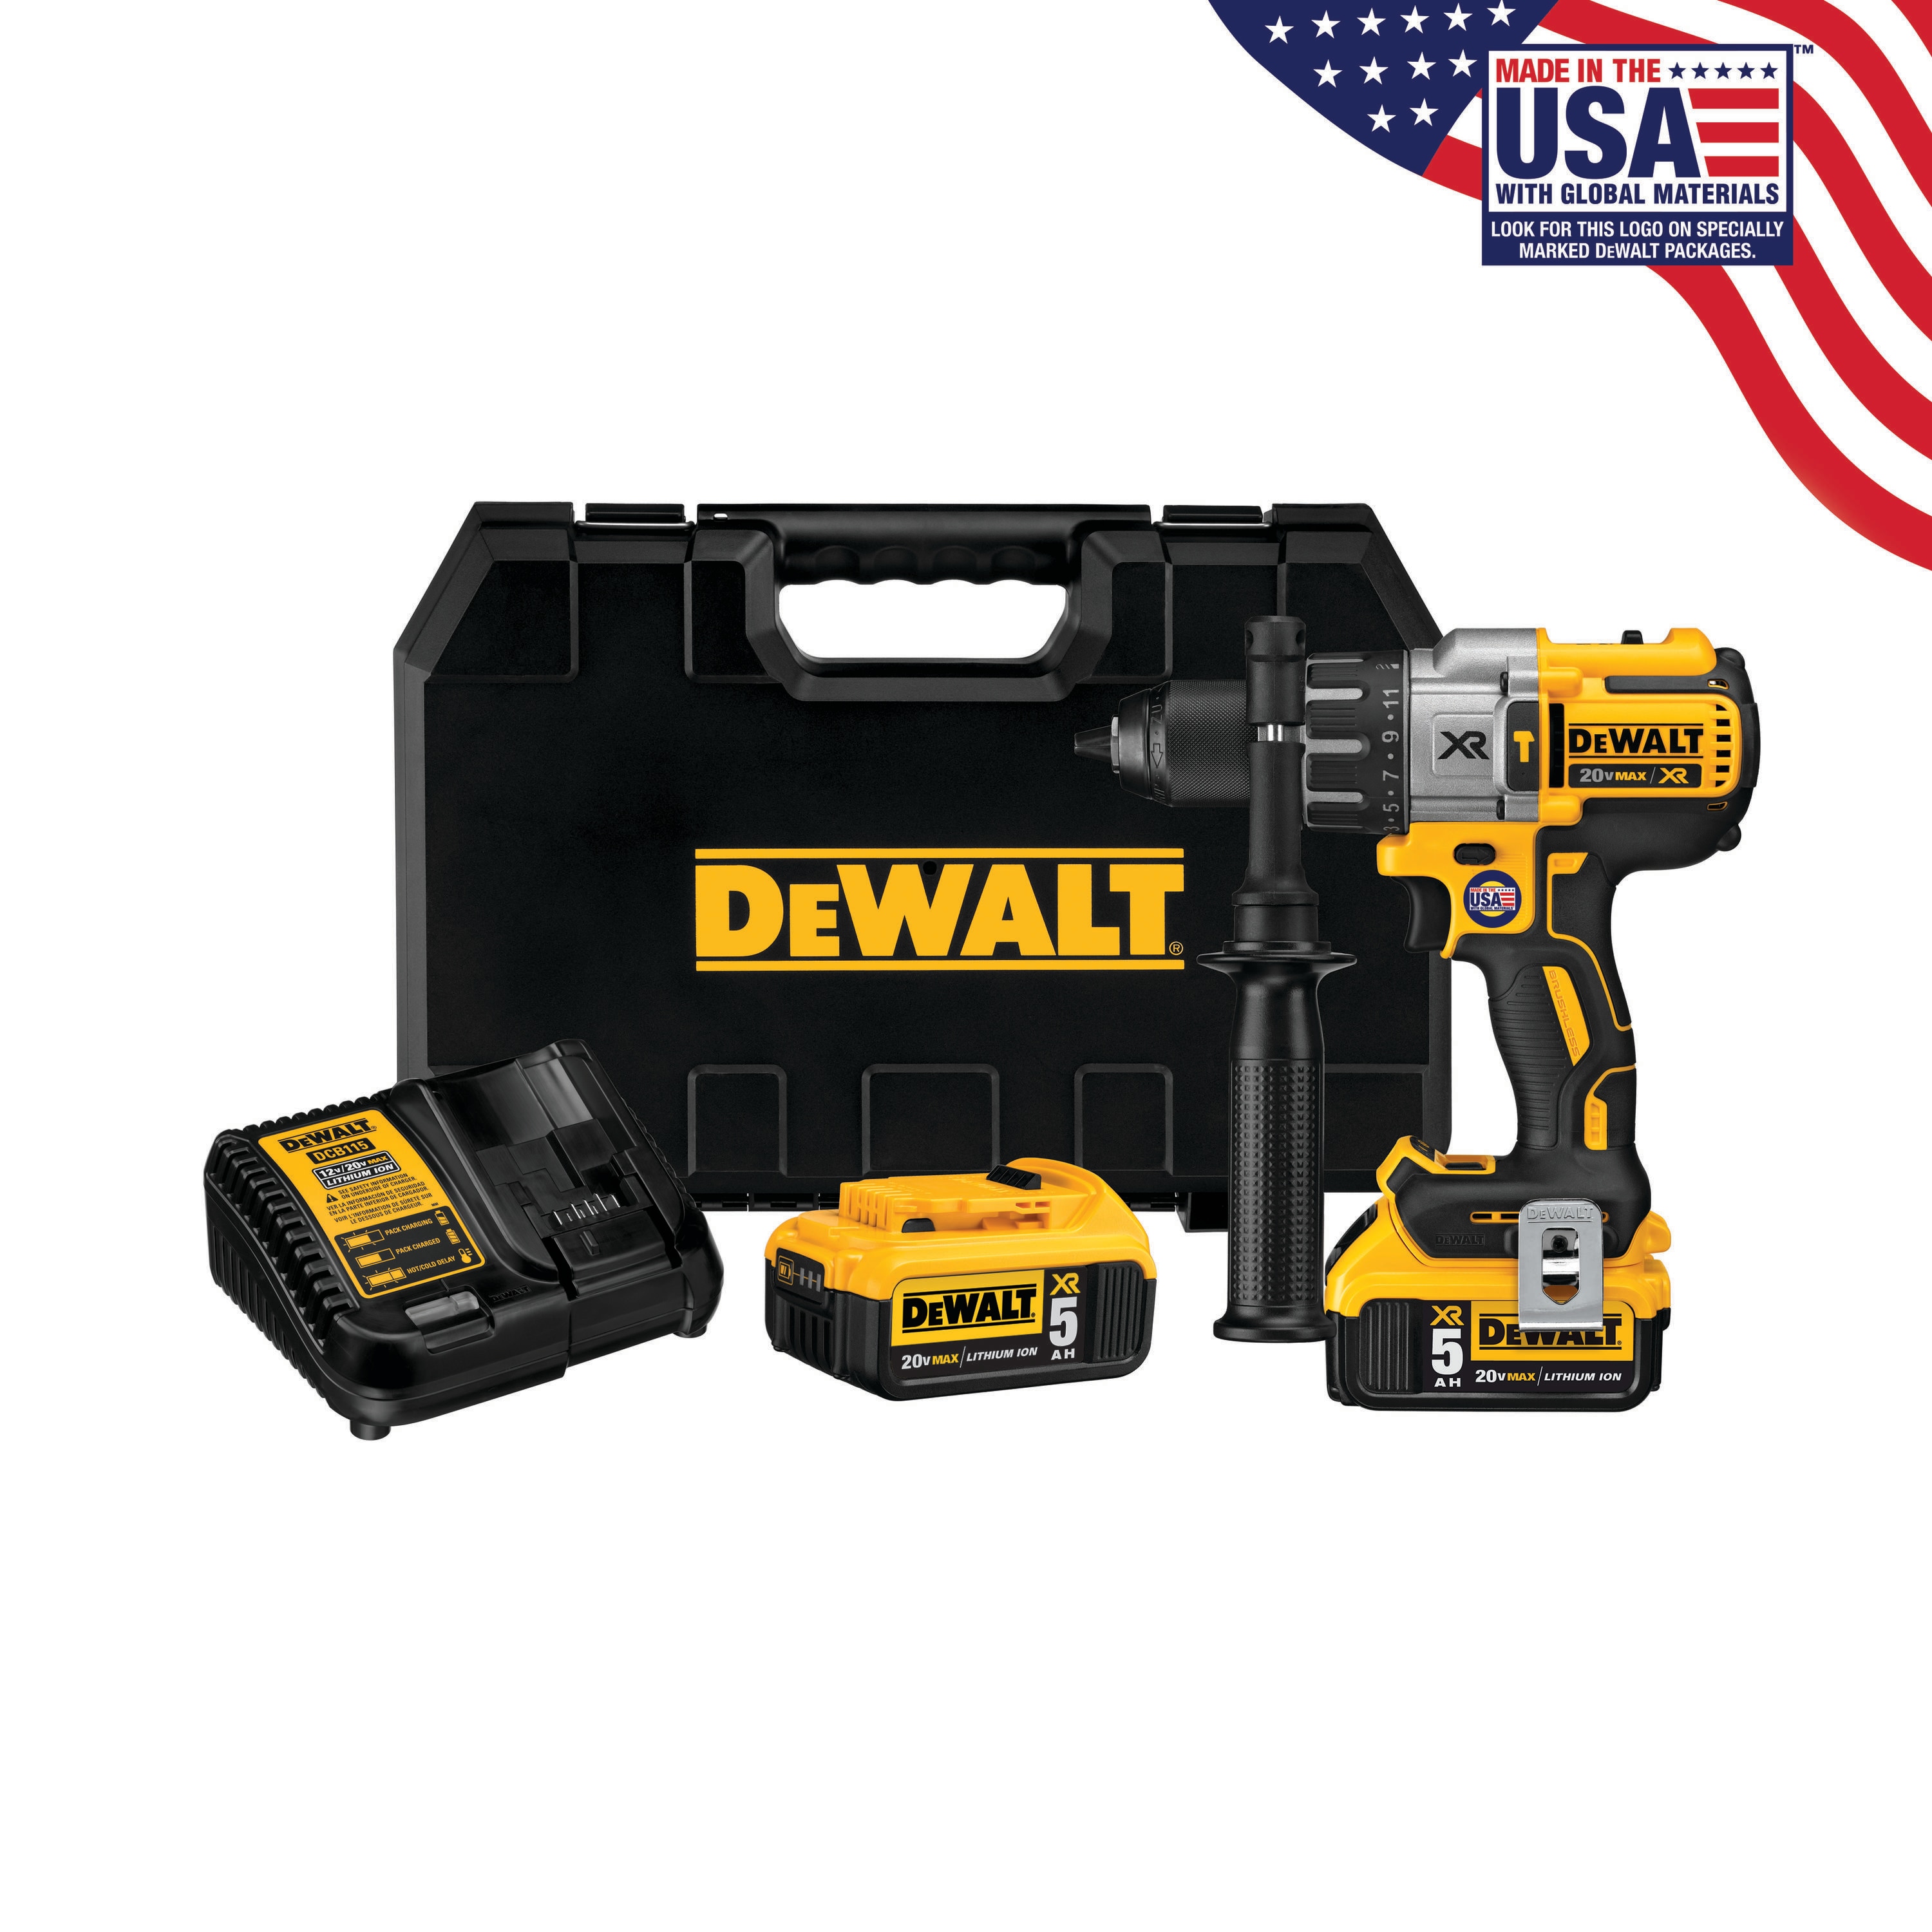 DEWALT XR 1/2-in 20-volt Max-Amp Variable Speed Brushless Cordless Hammer Drill (2-Batteries Included)